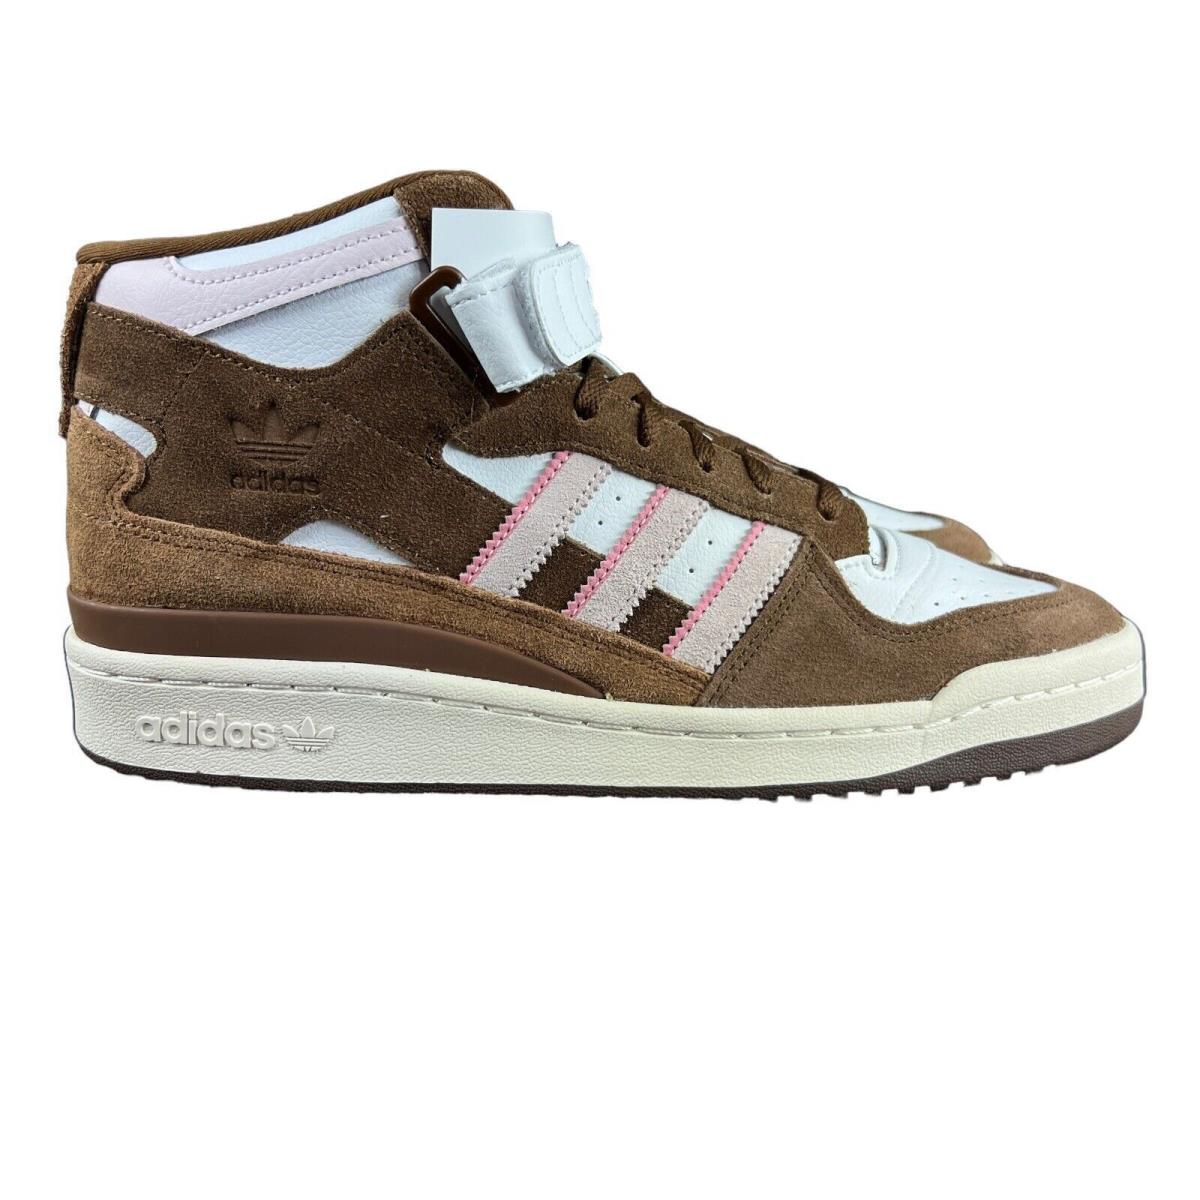 Adidas Forum Mid Chocolate To My Strawberry Brown Shoes GY6802 Men`s Sz 9 - 11.5 - Brown